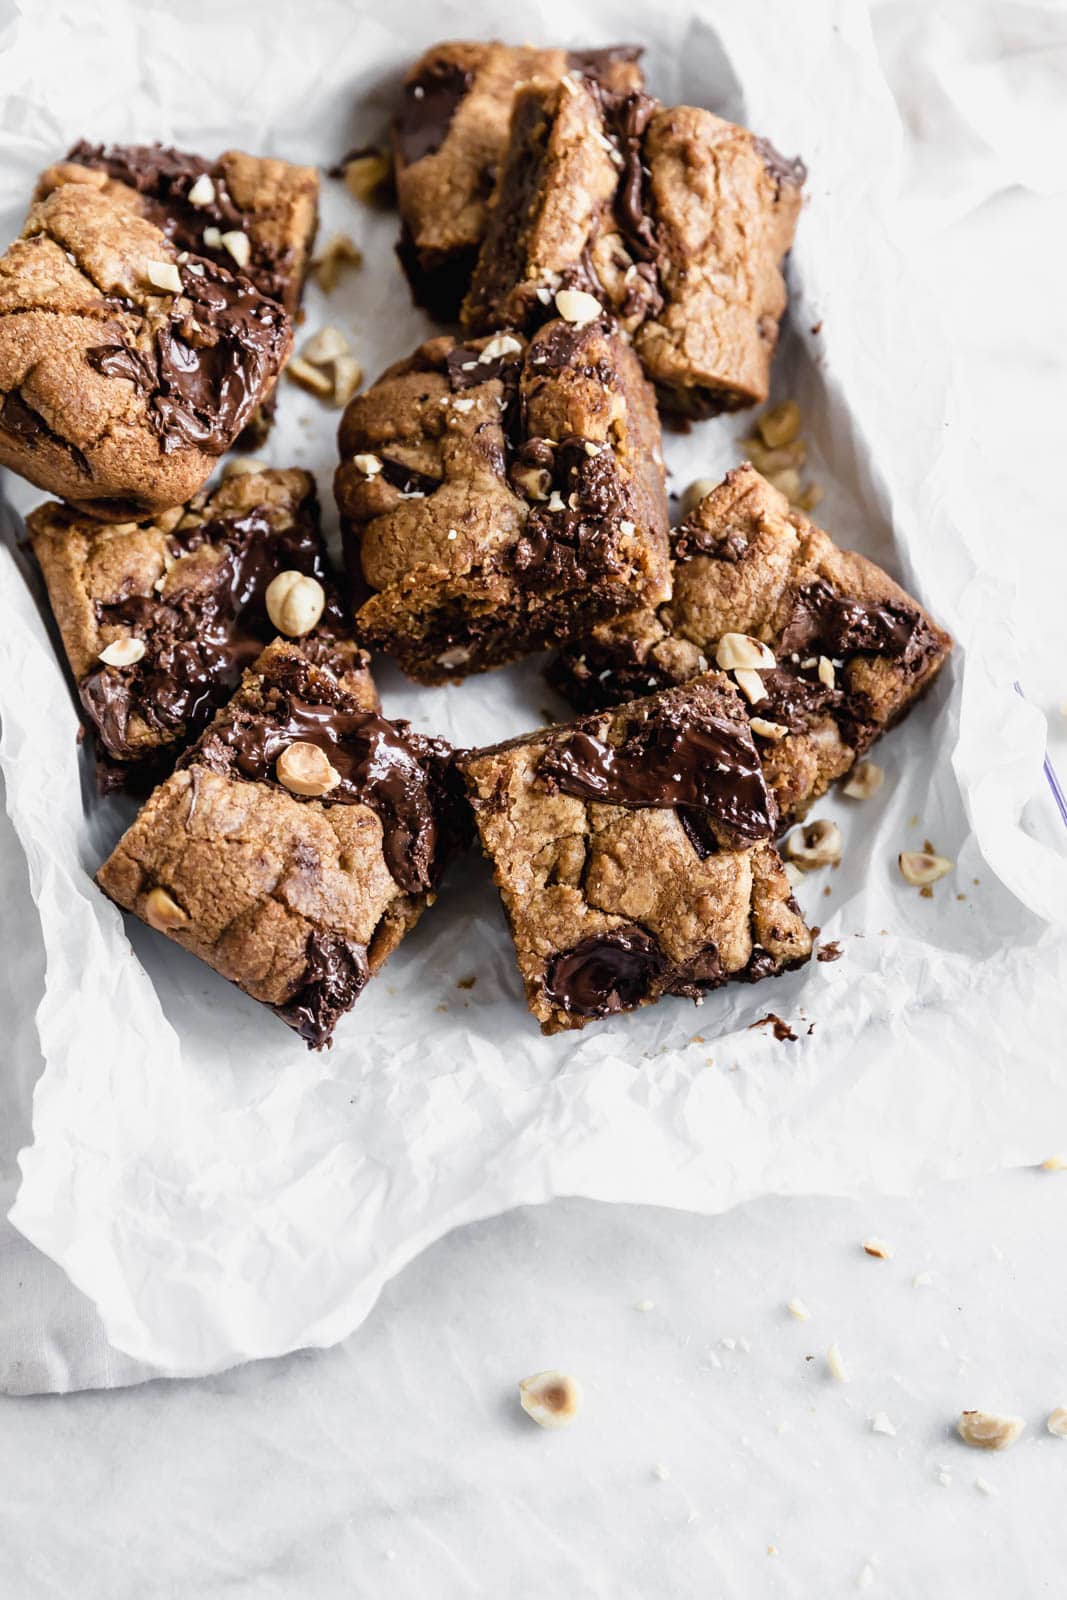 Brown Butter Nutella Chocolate Chip Cookie Bars with fat swirls of Nutella and lightly toasted hazelnuts. A salty sweet treat sure to be a showstopper.